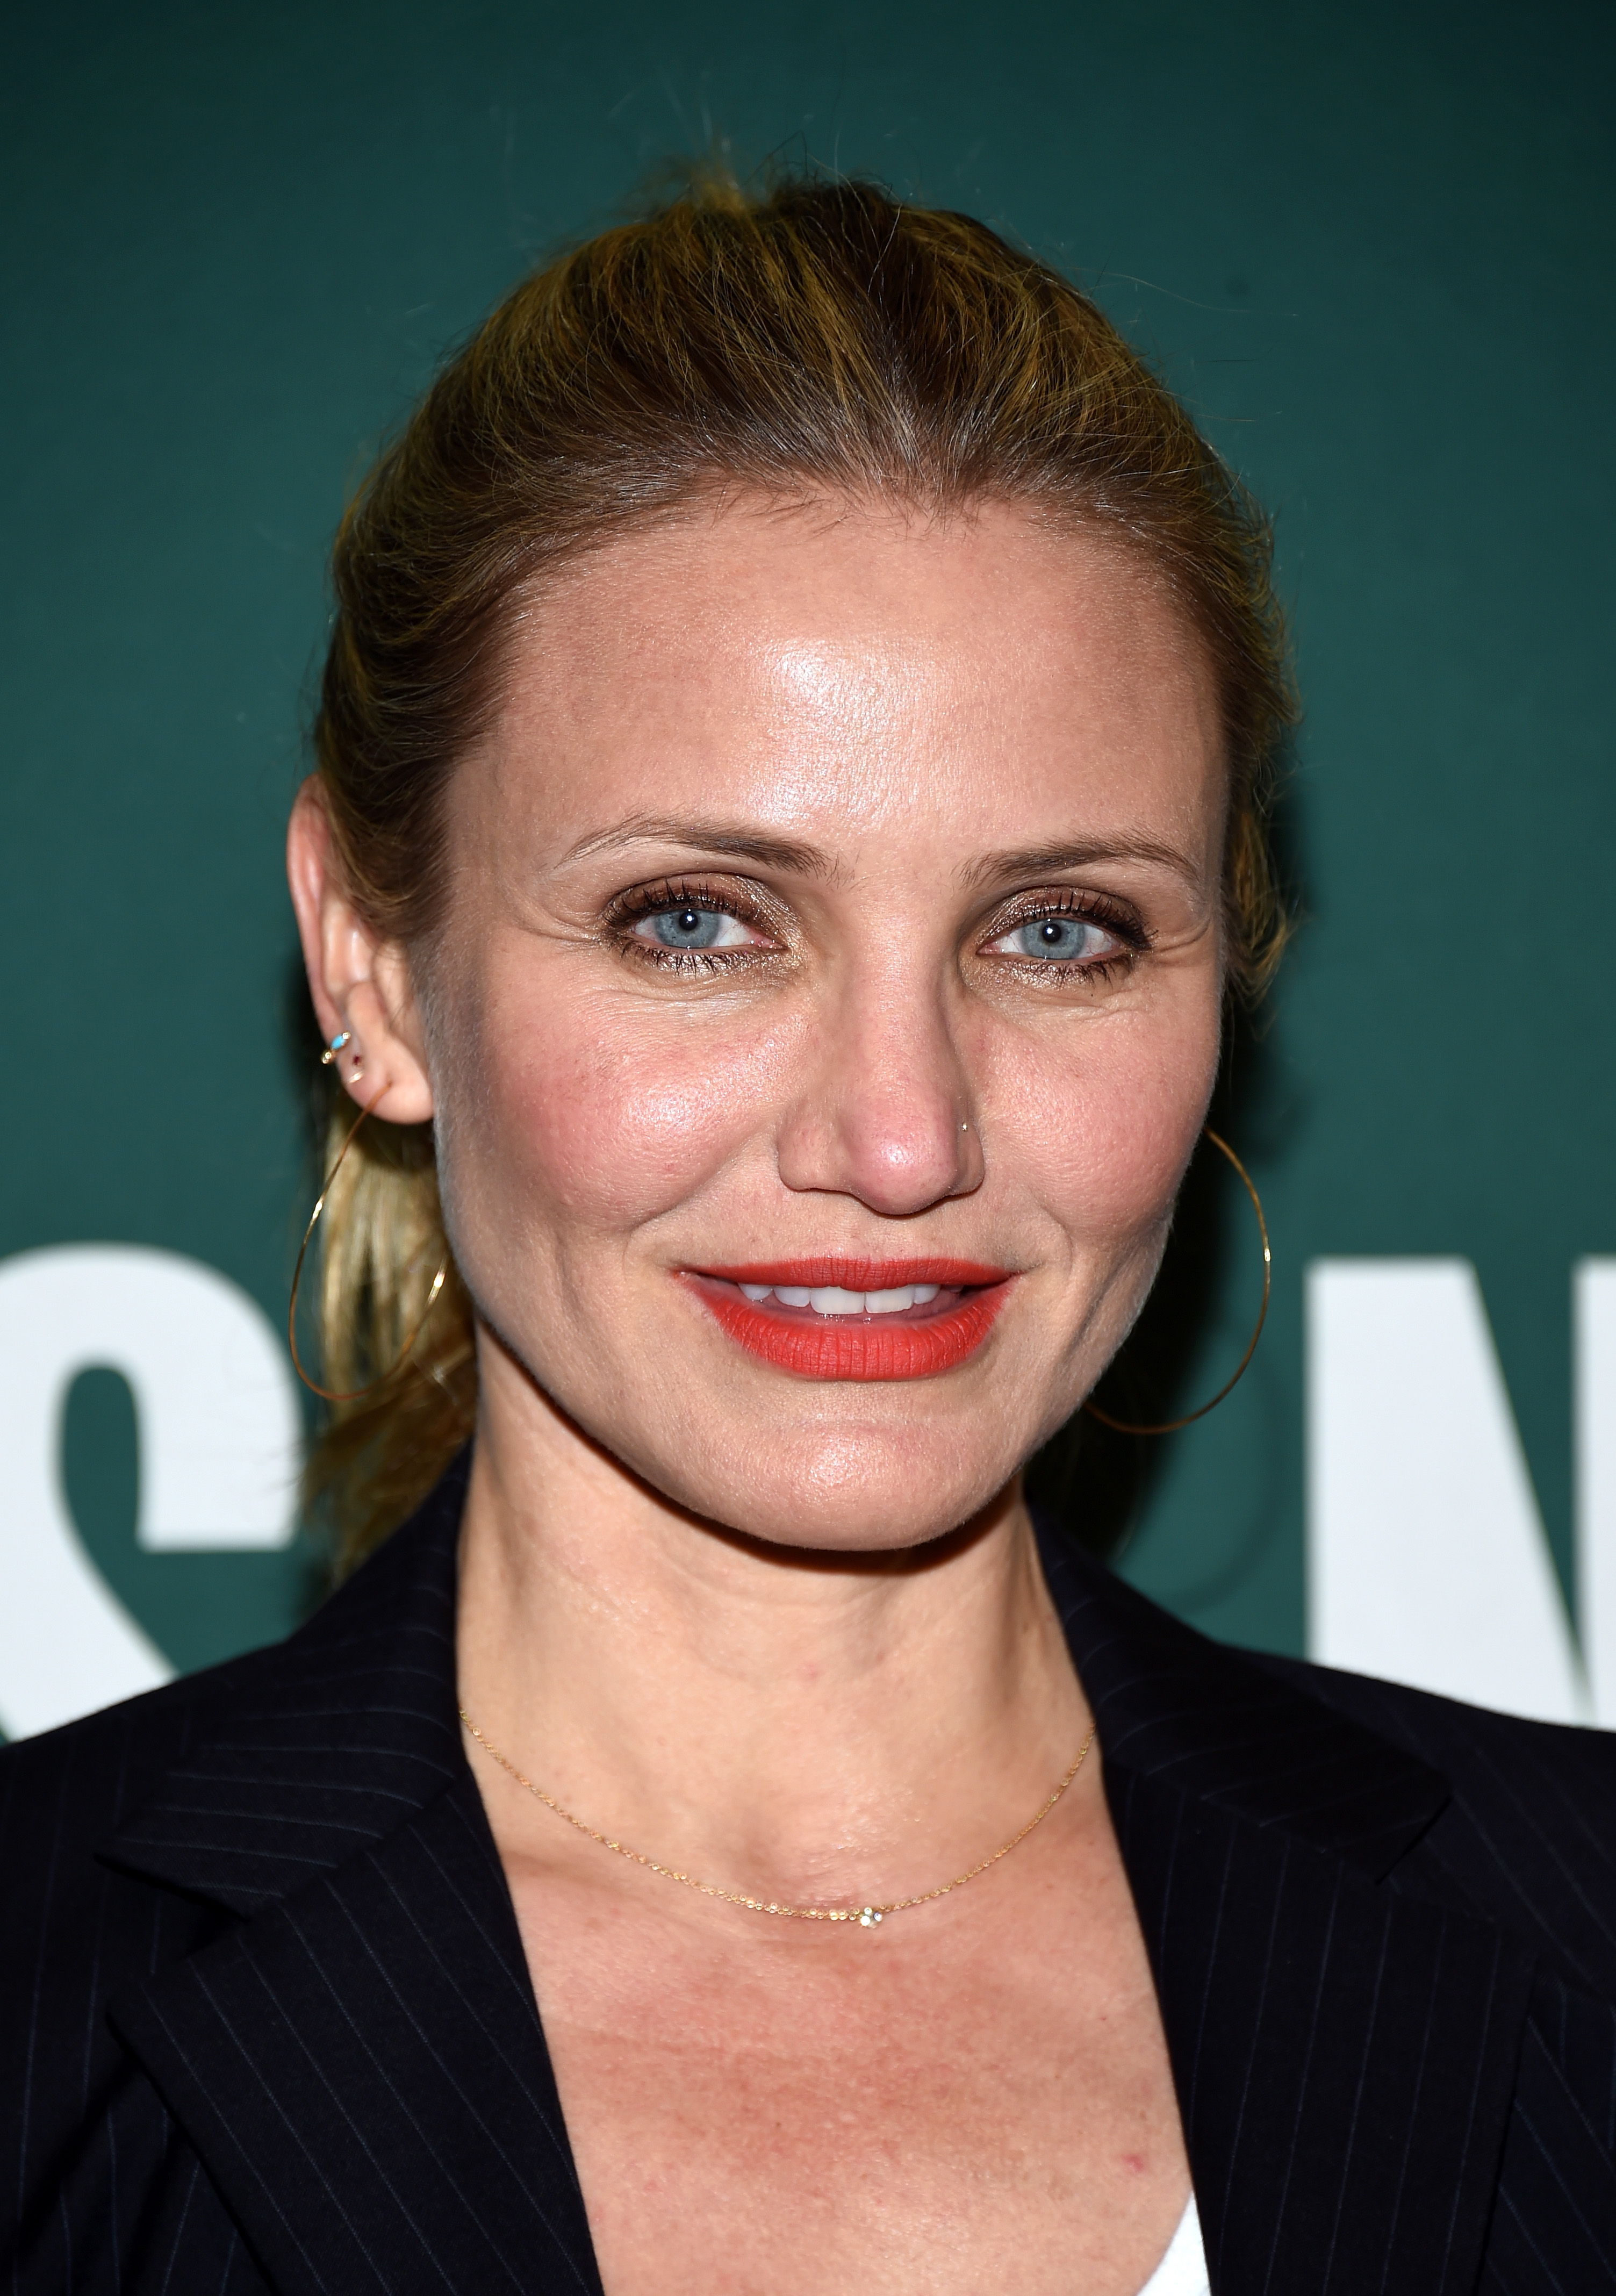 Cameron Diaz poses before signing copies of her new book "The Longevity Book: The Science Of Aging, The Biology Of Strength And The Privilege Of Time" at Barnes & Noble at The Grove on April 13, 2016, in Los Angeles, California | Source: Getty Images